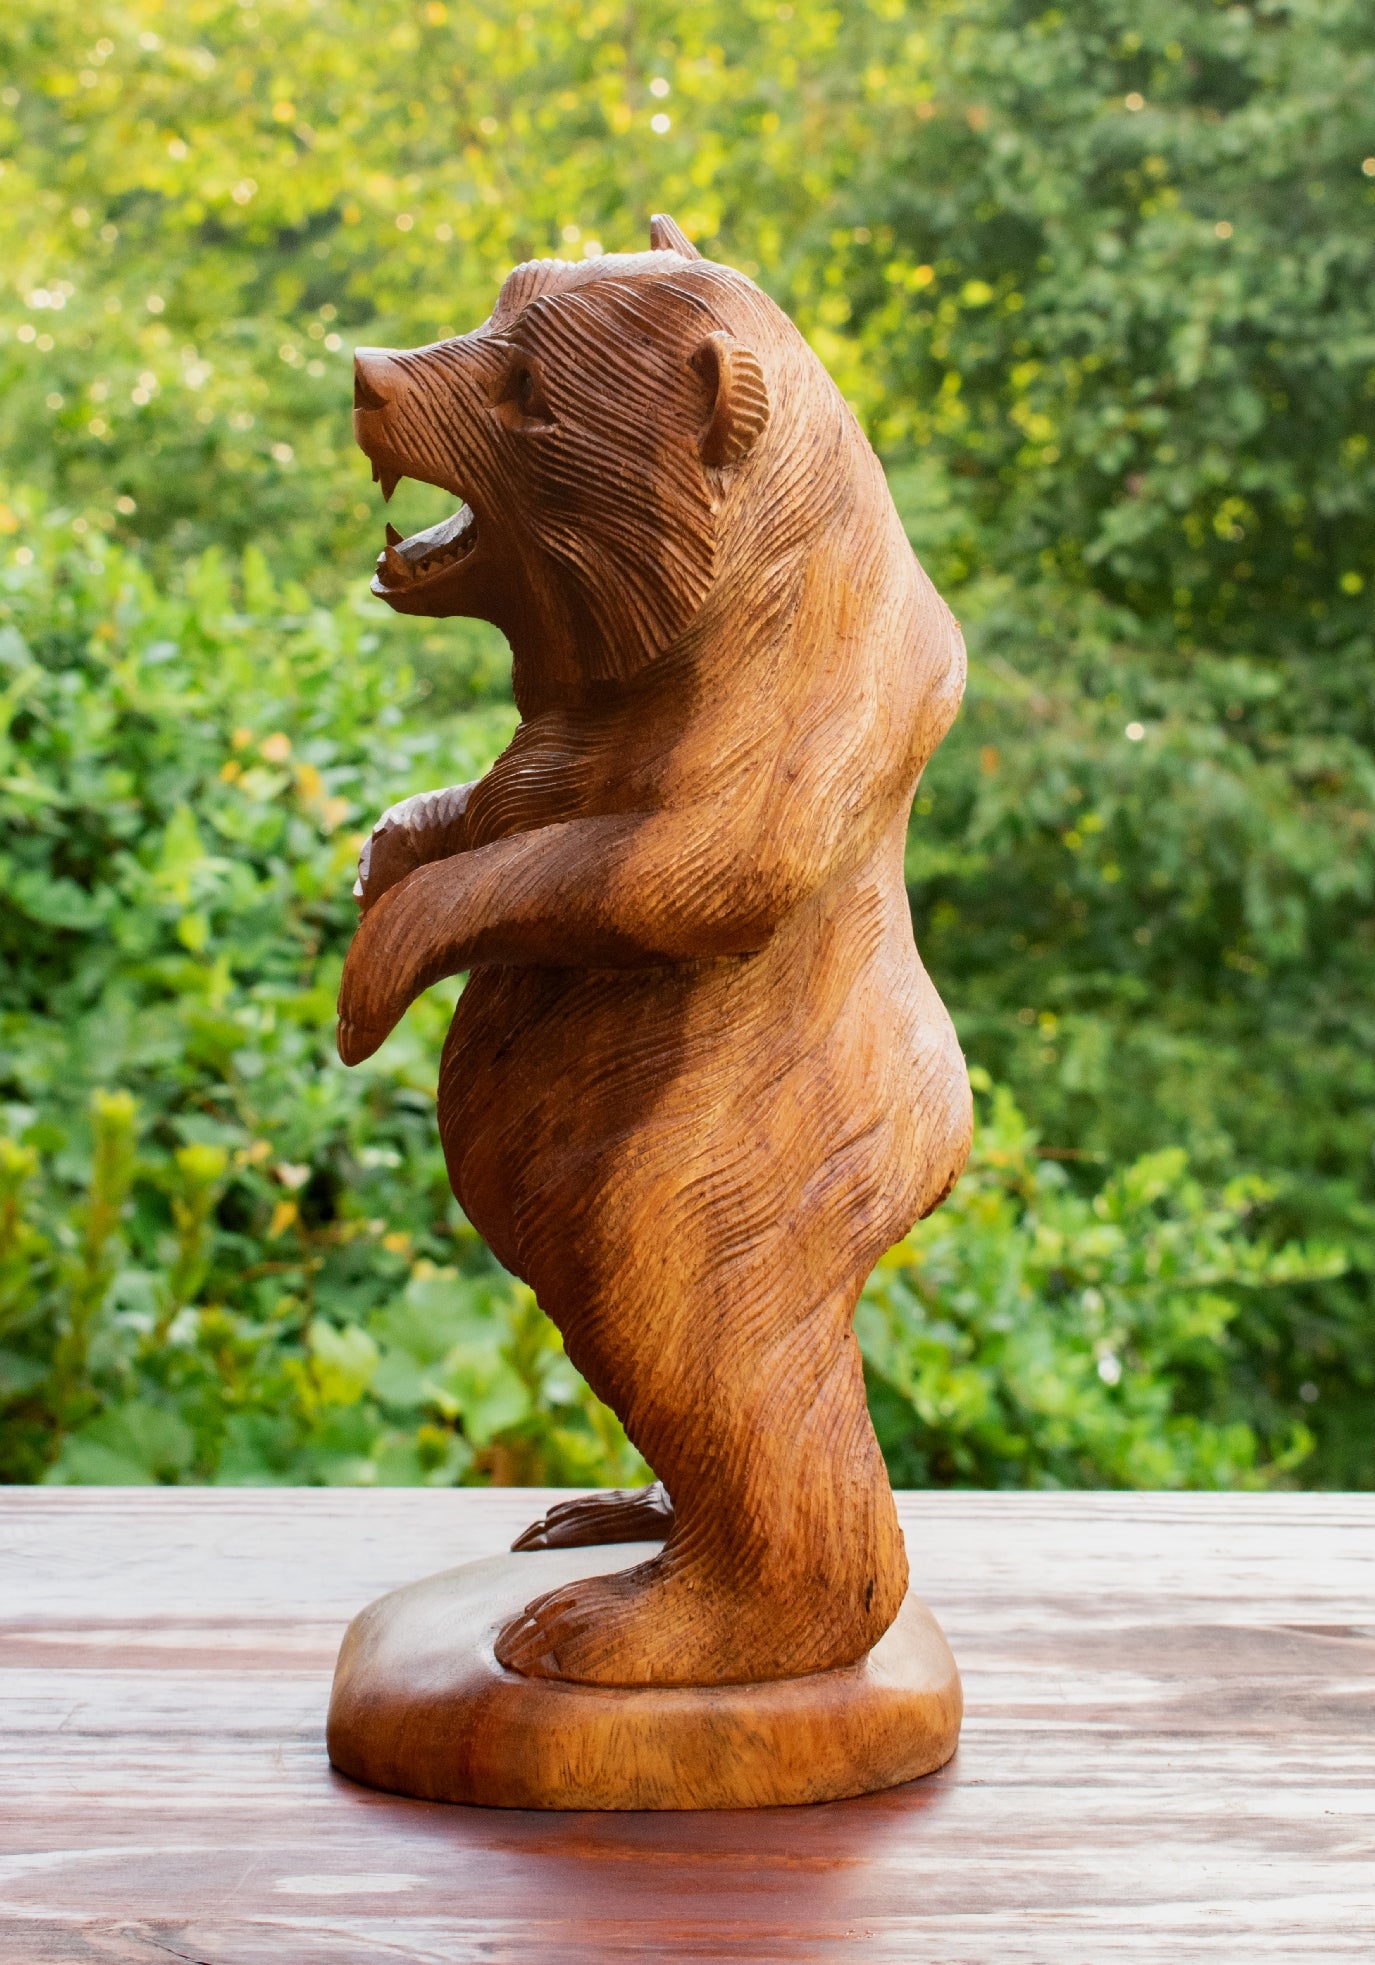 Wooden Hand Carved Grizzly Bear Standing Statue Handcrafted Handmade Figurine Sculpture Art Rustic Lodge Cabin Outdoor Indoor Home Decor Accent Decoration